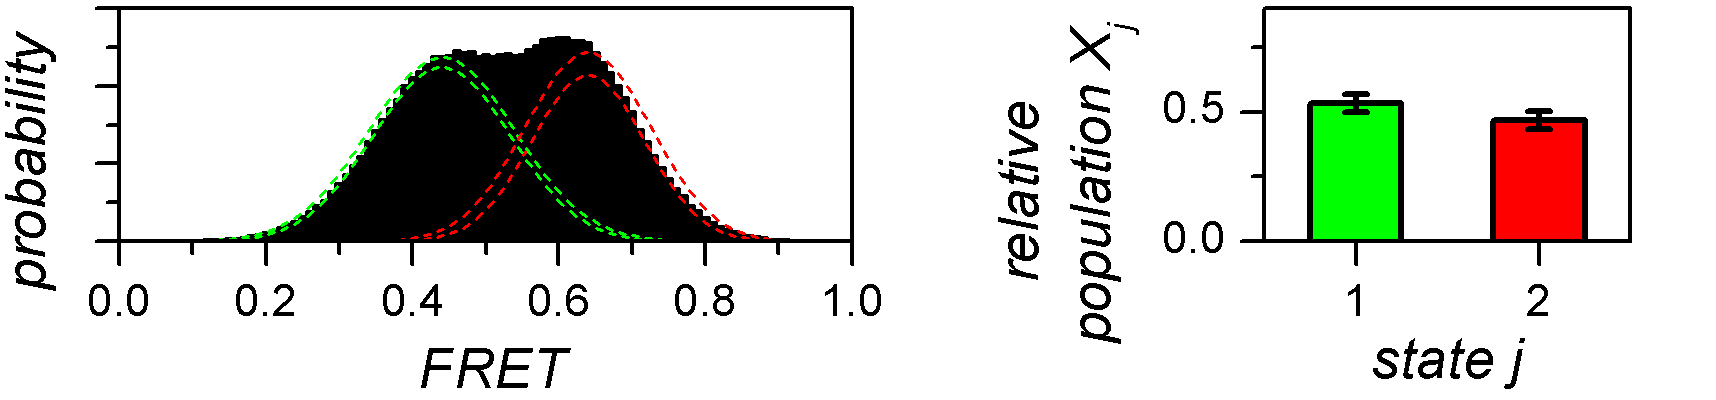 Estimation of cross sample variability with BOBA-FRET